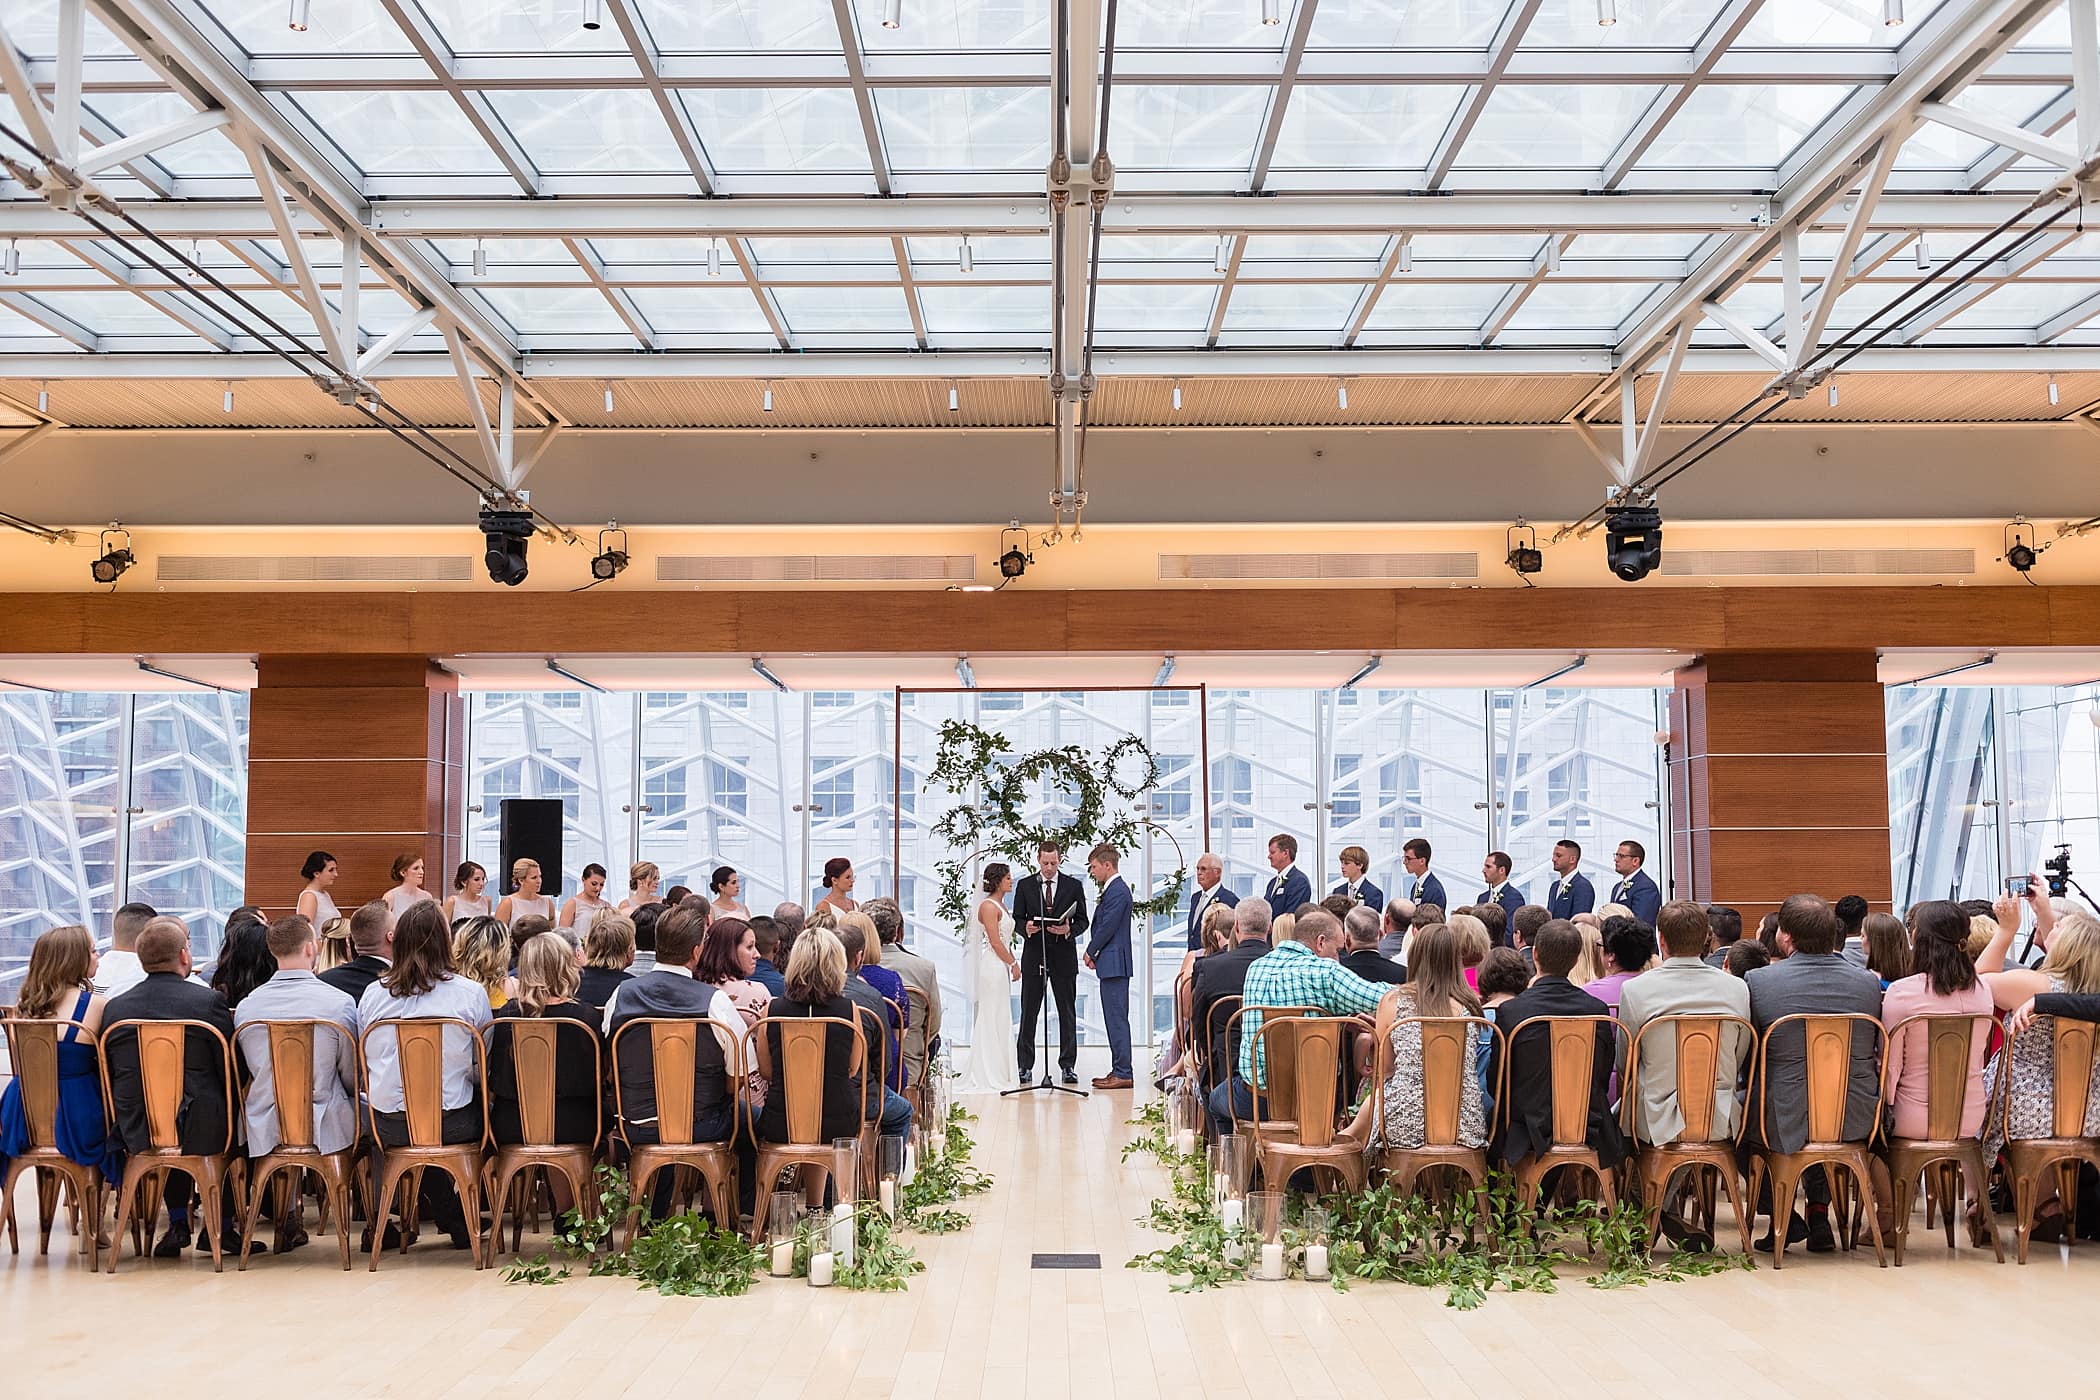 Wide photo of the industrial ceremony space for Kimmel Center wedding showing a ceremony backdrop of copper pipe and greenery wreaths